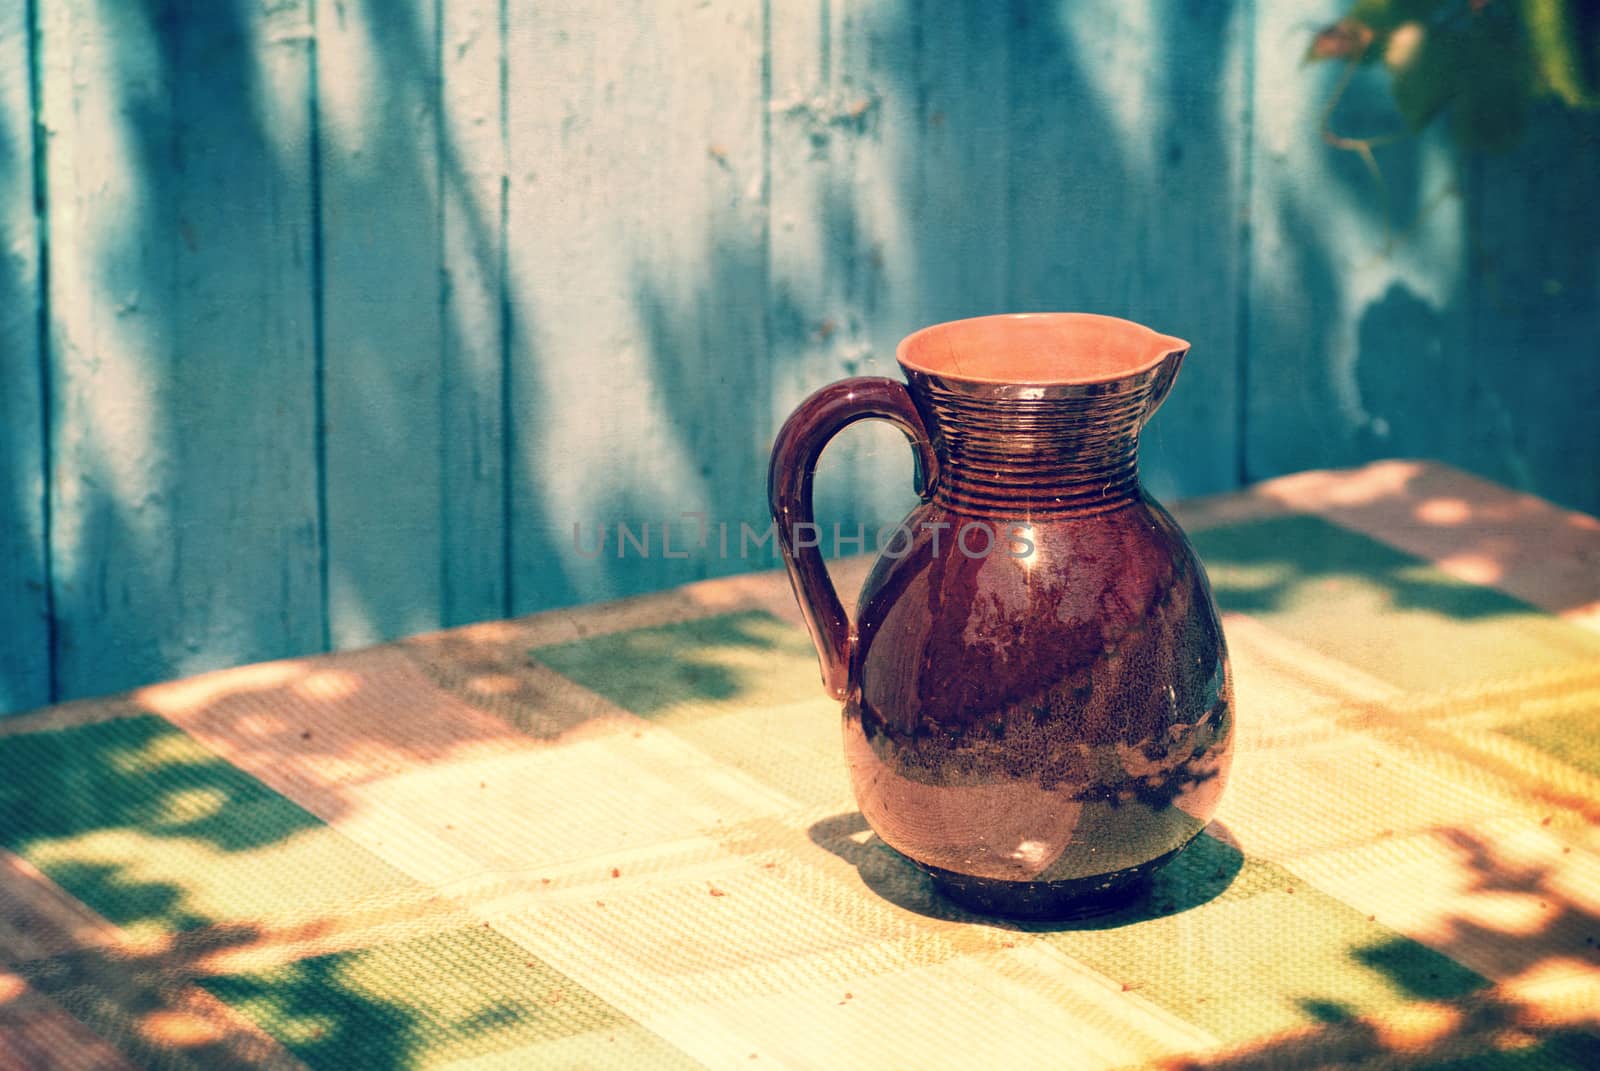 Vintage Retro jug on a table by Zhukow